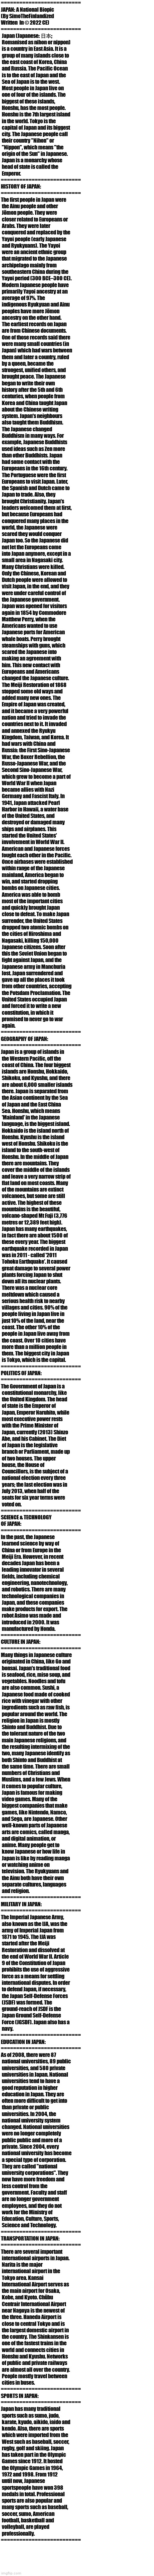 I Quickly Summarized Japan For All The Weebs Out There - Enjoy! | ==========================
JAPAN: A National Biopic 
(By SimoTheFinlandized 
Written  In © 2022 CE)
==========================
 Japan (Japanese: 日本;
 Romanised as nihon or nippon)
 is a country in East Asia. It is a
 group of many islands close to
 the east coast of Korea, China
 and Russia. The Pacific Ocean
 is to the east of Japan and the
 Sea of Japan is to the west.
 Most people in Japan live on
 one of four of the islands. The
 biggest of these islands,
 Honshu, has the most people.
 Honshu is the 7th largest island
 in the world. Tokyo is the
 capital of Japan and its biggest
 city. The Japanese people call
 their country "Nihon" or
 "Nippon", which means "the
 origin of the Sun" in Japanese.
 Japan is a monarchy whose
 head of state is called the
 Emperor.
==========================
HISTORY OF JAPAN:
==========================
The first people in Japan were
 the Ainu people and other
 Jōmon people. They were
 closer related to Europeans or
 Arabs. They were later
 conquered and replaced by the
 Yayoi people (early Japanese
 and Ryukyuans). The Yayoi
 were an ancient ethnic group
 that migrated to the Japanese
 archipelago mainly from
 southeastern China during the
 Yayoi period (300 BCE–300 CE).
 Modern Japanese people have
 primarily Yayoi ancestry at an
 average of 97%. The
 indigenous Ryukyuan and Ainu
 peoples have more Jōmon
 ancestry on the other hand.
 The earliest records on Japan
 are from Chinese documents.
 One of those records said there
 were many small countries (in
 Japan) which had wars between
 them and later a country, ruled
 by a queen, became the
 strongest, unified others, and
 brought peace. The Japanese
 began to write their own
 history after the 5th and 6th
 centuries, when people from
 Korea and China taught Japan
 about the Chinese writing
 system. Japan's neighbours
 also taught them Buddhism.
 The Japanese changed
 Buddhism in many ways. For
 example, Japanese Buddhists
 used ideas such as Zen more
 than other Buddhists. Japan
 had some contact with the
 Europeans in the 16th century.
 The Portuguese were the first
 Europeans to visit Japan. Later,
 the Spanish and Dutch came to
 Japan to trade. Also, they
 brought Christianity. Japan's
 leaders welcomed them at first, 
 but because Europeans had
 conquered many places in the
 world, the Japanese were
 scared they would conquer
 Japan too. So the Japanese did
 not let the Europeans come
 into Japan anymore, except in a
 small area in Nagasaki city.
 Many Christians were killed.
 Only the Chinese, Korean and
 Dutch people were allowed to
 visit Japan, in the end, and they
 were under careful control of
 the Japanese government.
 Japan was opened for visitors
 again in 1854 by Commodore
 Matthew Perry, when the
 Americans wanted to use
 Japanese ports for American
 whale boats. Perry brought
 steamships with guns, which
 scared the Japanese into
 making an agreement with
 him. This new contact with
 Europeans and Americans
 changed the Japanese culture.
 The Meiji Restoration of 1868
 stopped some old ways and
 added many new ones. The
 Empire of Japan was created,
 and it became a very powerful
 nation and tried to invade the
 countries next to it. It invaded
 and annexed the Ryukyu
 Kingdom, Taiwan, and Korea. It
 had wars with China and
 Russia: the First Sino-Japanese
 War, the Boxer Rebellion, the
 Russo-Japanese War, and the
 Second Sino-Japanese War,
 which grew to become a part of
 World War II when Japan
 became allies with Nazi
 Germany and Fascist Italy. In
 1941, Japan attacked Pearl
 Harbor in Hawaii, a water base
 of the United States, and
 destroyed or damaged many
 ships and airplanes. This
 started the United States'
 involvement in World War II.
 American and Japanese forces
 fought each other in the Pacific.
 Once airbases were established
 within range of the Japanese
 mainland, America began to
 win, and started dropping
 bombs on Japanese cities.
 America was able to bomb
 most of the important cities
 and quickly brought Japan
 close to defeat. To make Japan
 surrender, the United States
 dropped two atomic bombs on
 the cities of Hiroshima and
 Nagasaki, killing 150,000
 Japanese citizens. Soon after
 this the Soviet Union began to
 fight against Japan, and the
 Japanese army in Manchuria
 lost. Japan surrendered and
 gave up all the places it took
 from other countries, accepting
 the Potsdam Proclamation. The
 United States occupied Japan
 and forced it to write a new
 constitution, in which it
 promised to never go to war
 again.
==========================
GEOGRAPHY OF JAPAN:
==========================
Japan is a group of islands in
 the Western Pacific, off the
 coast of China. The four biggest
 islands are Honshu, Hokkaido,
 Shikoku, and Kyushu, and there
 are about 6,000 smaller islands
 there. Japan is separated from
 the Asian continent by the Sea
 of Japan and the East China
 Sea. Honshu, which means
 'Mainland' in the Japanese
 language, is the biggest island.
 Hokkaido is the island north of
 Honshu. Kyushu is the island
 west of Honshu. Shikoku is the
 island to the south-west of
 Honshu. In the middle of Japan
 there are mountains. They
 cover the middle of the islands
 and leave a very narrow strip of
 flat land on most coasts. Many
 of the mountains are extinct
 volcanoes, but some are still
 active. The highest of these
 mountains is the beautiful,
 volcano-shaped Mt Fuji (3,776
 metres or 12,389 feet high).
 Japan has many earthquakes,
 in fact there are about 1500 of
 these every year. The biggest
 earthquake recorded in Japan
 was in 2011 - called '2011
 Tohoku Earthquake'. It caused
 great damage to several power
 plants forcing Japan to shut
 down all its nuclear plants.
 There was a nuclear core
 meltdown which caused a
 serious health risk to nearby
 villages and cities. 90% of the
 people living in Japan live in
 just 10% of the land, near the
 coast. The other 10% of the
 people in Japan live away from
 the coast. Over 10 cities have
 more than a million people in
 them. The biggest city in Japan
 is Tokyo, which is the capital.
==========================
POLITICS OF JAPAN:
==========================
The Government of Japan is a
 constitutional monarchy, like
 the United Kingdom. The head
 of state is the Emperor of
 Japan, Emperor Naruhito, while
 most executive power rests
 with the Prime Minister of
 Japan, currently (2013) Shinzo
 Abe, and his Cabinet. The Diet
 of Japan is the legislative
 branch or Parliament, made up
 of two houses. The upper
 house, the House of
 Councillors, is the subject of a
 national election every three
 years; the last election was in
 July 2013, when half of the
 seats for six year terms were
 voted on.
==========================
SCIENCE & TECHNOLOGY 
OF JAPAN:
==========================
In the past, the Japanese
 learned science by way of
 China or from Europe in the
 Meiji Era. However, in recent
 decades Japan has been a
 leading innovator in several
 fields, including chemical
 engineering, nanotechnology,
 and robotics. There are many
 technological companies in
 Japan, and these companies
 make products for export. The
 robot Asimo was made and
 introduced in 2000. It was
 manufactured by Honda.
==========================
CULTURE IN JAPAN:
==========================
Many things in Japanese culture
 originated in China, like Go and
 bonsai. Japan's traditional food
 is seafood, rice, miso soup, and
 vegetables. Noodles and tofu
 are also common. Sushi, a
 Japanese food made of cooked
 rice with vinegar with other
 ingredients such as raw fish, is
 popular around the world. The
 religion in Japan is mostly
 Shinto and Buddhist. Due to
 the tolerant nature of the two
 main Japanese religions, and
 the resulting intermixing of the
 two, many Japanese identify as
 both Shinto and Buddhist at
 the same time. There are small
 numbers of Christians and
 Muslims, and a few Jews. When
 it comes to popular culture,
 Japan is famous for making
 video games. Many of the
 biggest companies that make
 games, like Nintendo, Namco,
 and Sega, are Japanese. Other
 well-known parts of Japanese
 arts are comics, called manga,
 and digital animation, or
 anime. Many people get to
 know Japanese or how life in
 Japan is like by reading manga
 or watching anime on
 television. The Ryukyuans and
 the Ainu both have their own
 separate cultures, languages
 and religion.
==========================
MILITARY IN JAPAN:
==========================
The Imperial Japanese Army,
 also known as the IJA, was the
 army of Imperial Japan from
 1871 to 1945. The IJA was
 started after the Meiji
 Restoration and dissolved at
 the end of World War II. Article
 9 of the Constitution of Japan
 prohibits the use of aggressive
 force as a means for settling
 international disputes. In order
 to defend Japan, if necessary,
 the Japan Self-Defense Forces
 (JSDF) was formed. The
 ground-reach of JSDF is the
 Japan Ground Self-Defense
 Force (JGSDF). Japan also has a
 navy.
==========================
EDUCATION IN JAPAN:
==========================
As of 2008, there were 87
 national universities, 89 public
 universities, and 580 private
 universities in Japan. National
 universities tend to have a
 good reputation in higher
 education in Japan. They are
 often more difficult to get into
 than private or public
 universities. In 2004, the
 national university system
 changed. National universities
 were no longer completely
 public public and more of a
 private. Since 2004, every
 national university has become
 a special type of corporation.
 They are called "national
 university corporations". They
 now have more freedom and
 less control from the
 government. Faculty and staff
 are no longer government
 employees, and they do not
 work for the Ministry of
 Education, Culture, Sports,
 Science and Technology.
==========================
TRANSPORTATION IN JAPAN:
==========================
There are several important
 international airports in Japan.
 Narita is the major
 international airport in the
 Tokyo area. Kansai
 International Airport serves as
 the main airport for Osaka,
 Kobe, and Kyoto. Chūbu
 Centrair International Airport
 near Nagoya is the newest of
 the three. Haneda Airport is
 close to central Tokyo and is
 the largest domestic airport in
 the country. The Shinkansen is
 one of the fastest trains in the
 world and connects cities in
 Honshu and Kyushu. Networks
 of public and private railways
 are almost all over the country.
 People mostly travel between
 cities in buses.
==========================
SPORTS IN JAPAN:
==========================
Japan has many traditional
 sports such as sumo, judo,
 karate, kyudo, aikido, iaido and
 kendo. Also, there are sports
 which were imported from the
 West such as baseball, soccer,
 rugby, golf and skiing. Japan
 has taken part in the Olympic
 Games since 1912. It hosted
 the Olympic Games in 1964,
 1972 and 1998. From 1912
 until now, Japanese
 sportspeople have won 398
 medals in total. Professional
 sports are also popular and
 many sports such as baseball,
 soccer, sumo, American
 football, basketball and
 volleyball, are played
 professionally.
========================== | image tagged in simothefinlandized,japan,summarized,for the weebs | made w/ Imgflip meme maker